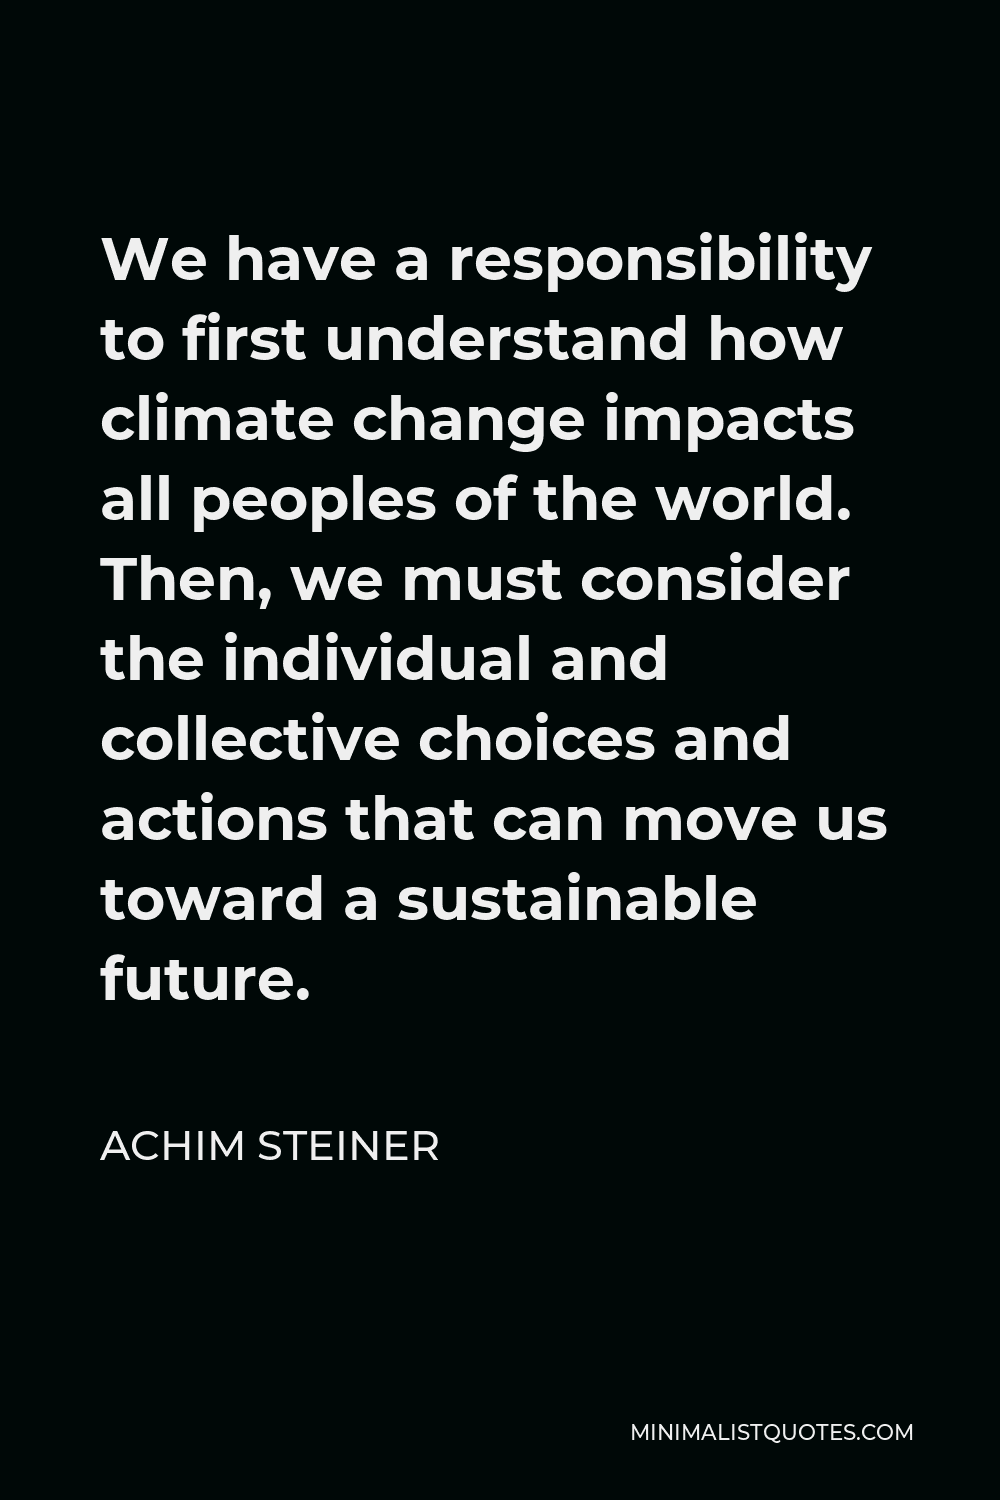 Achim Steiner Quote - We have a responsibility to first understand how climate change impacts all peoples of the world. Then, we must consider the individual and collective choices and actions that can move us toward a sustainable future.